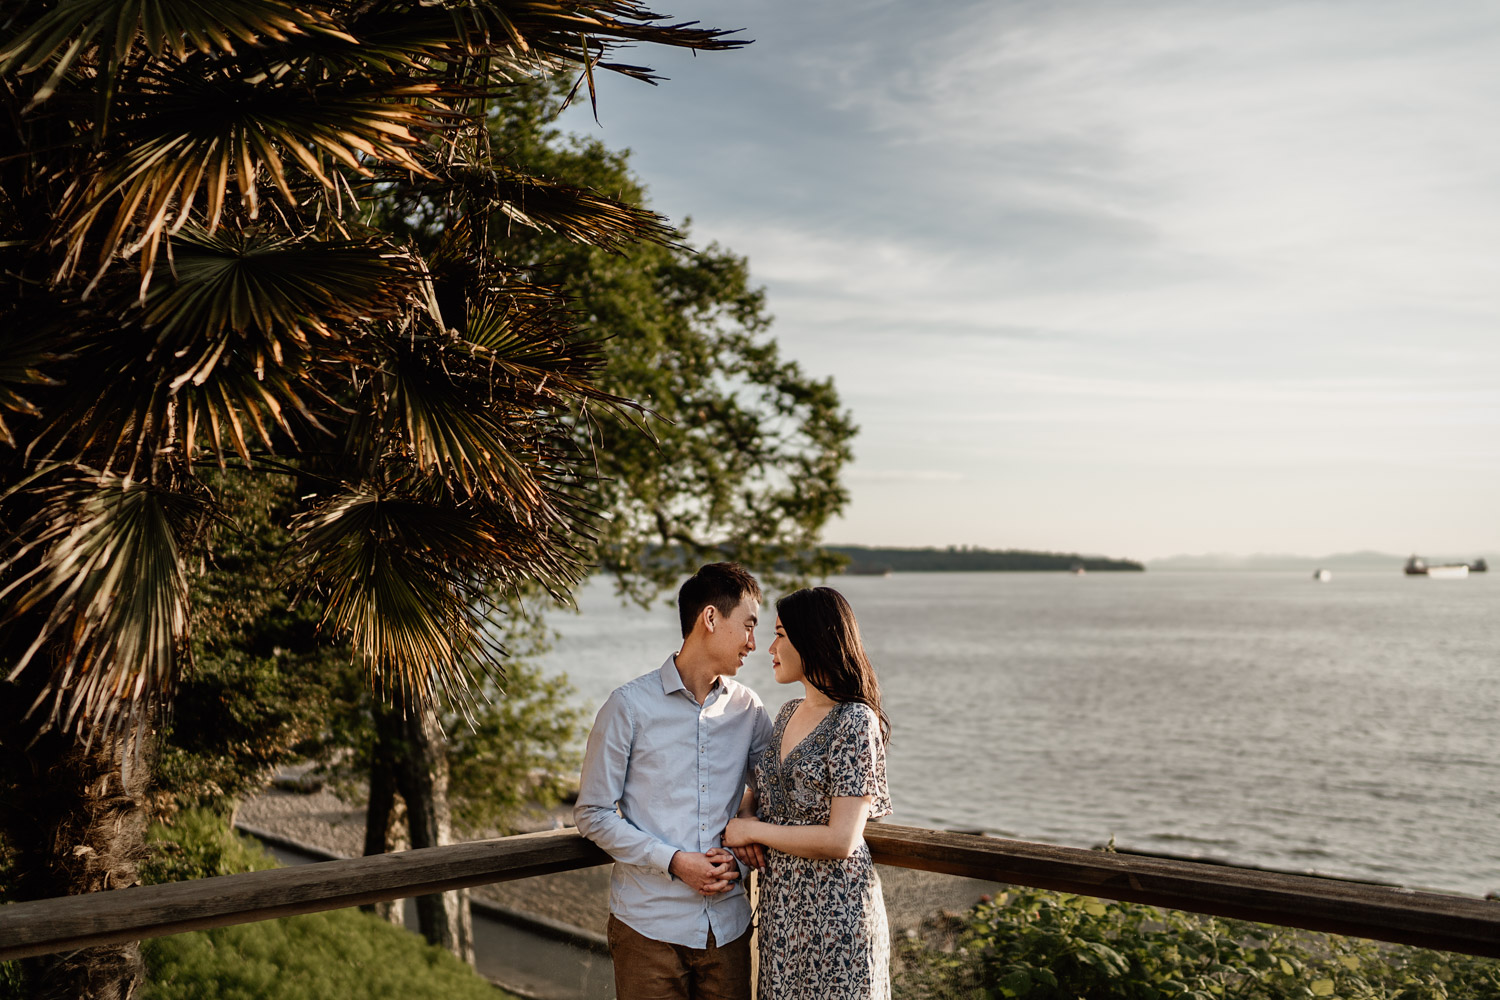 stanley park engagement photography in vancouver bc during sunset or golden hour at third beach